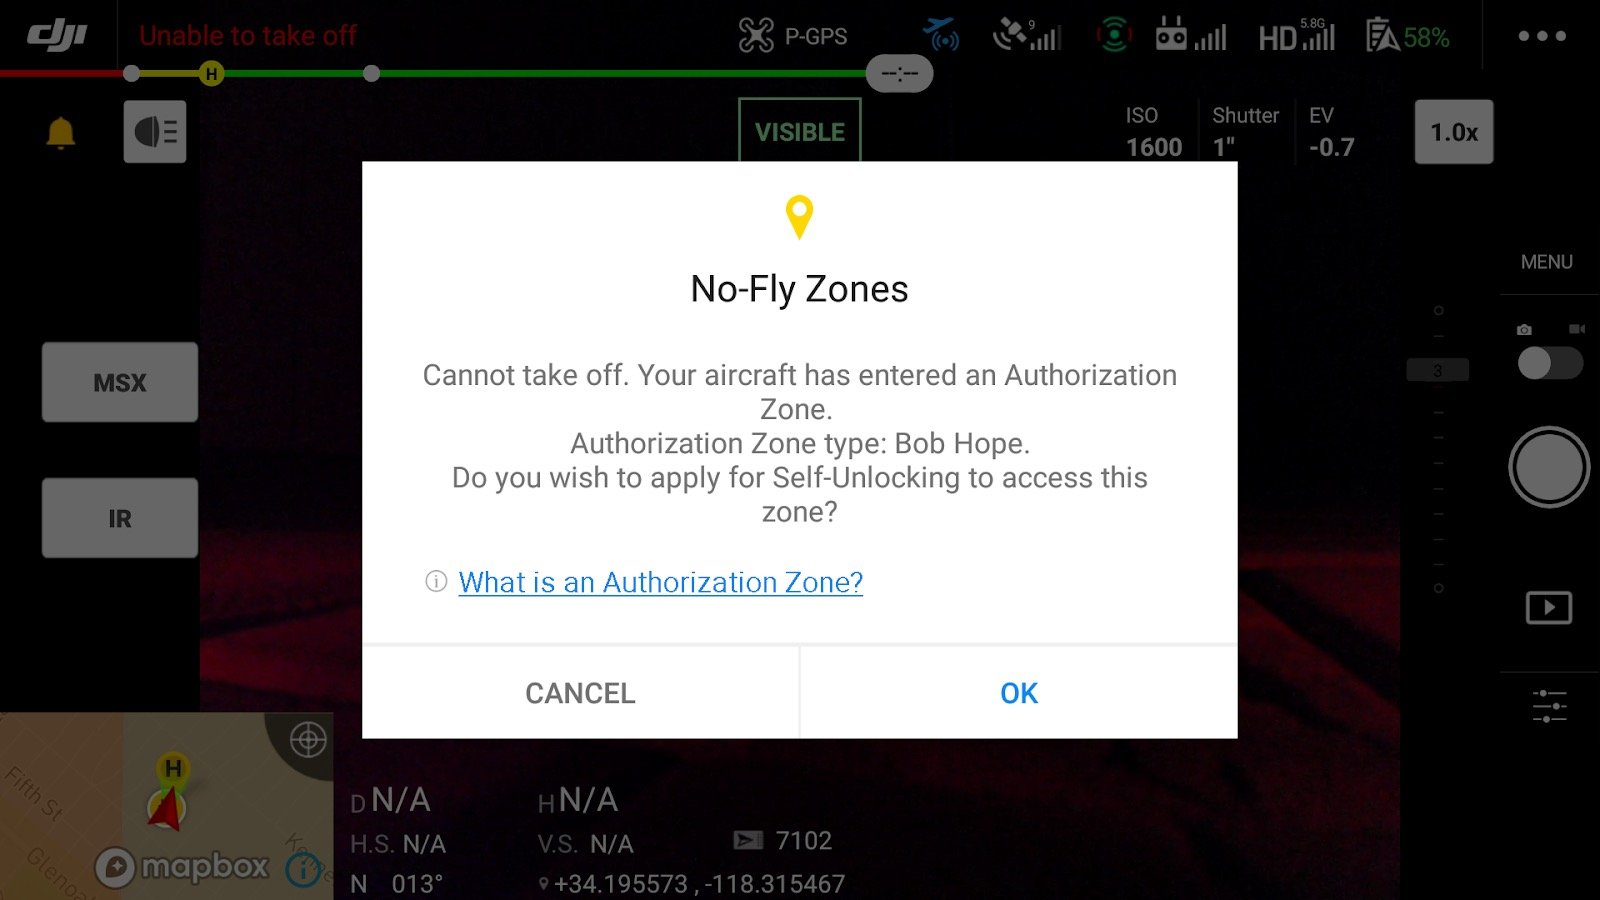 How to Unlock a GEO Zone on Drone